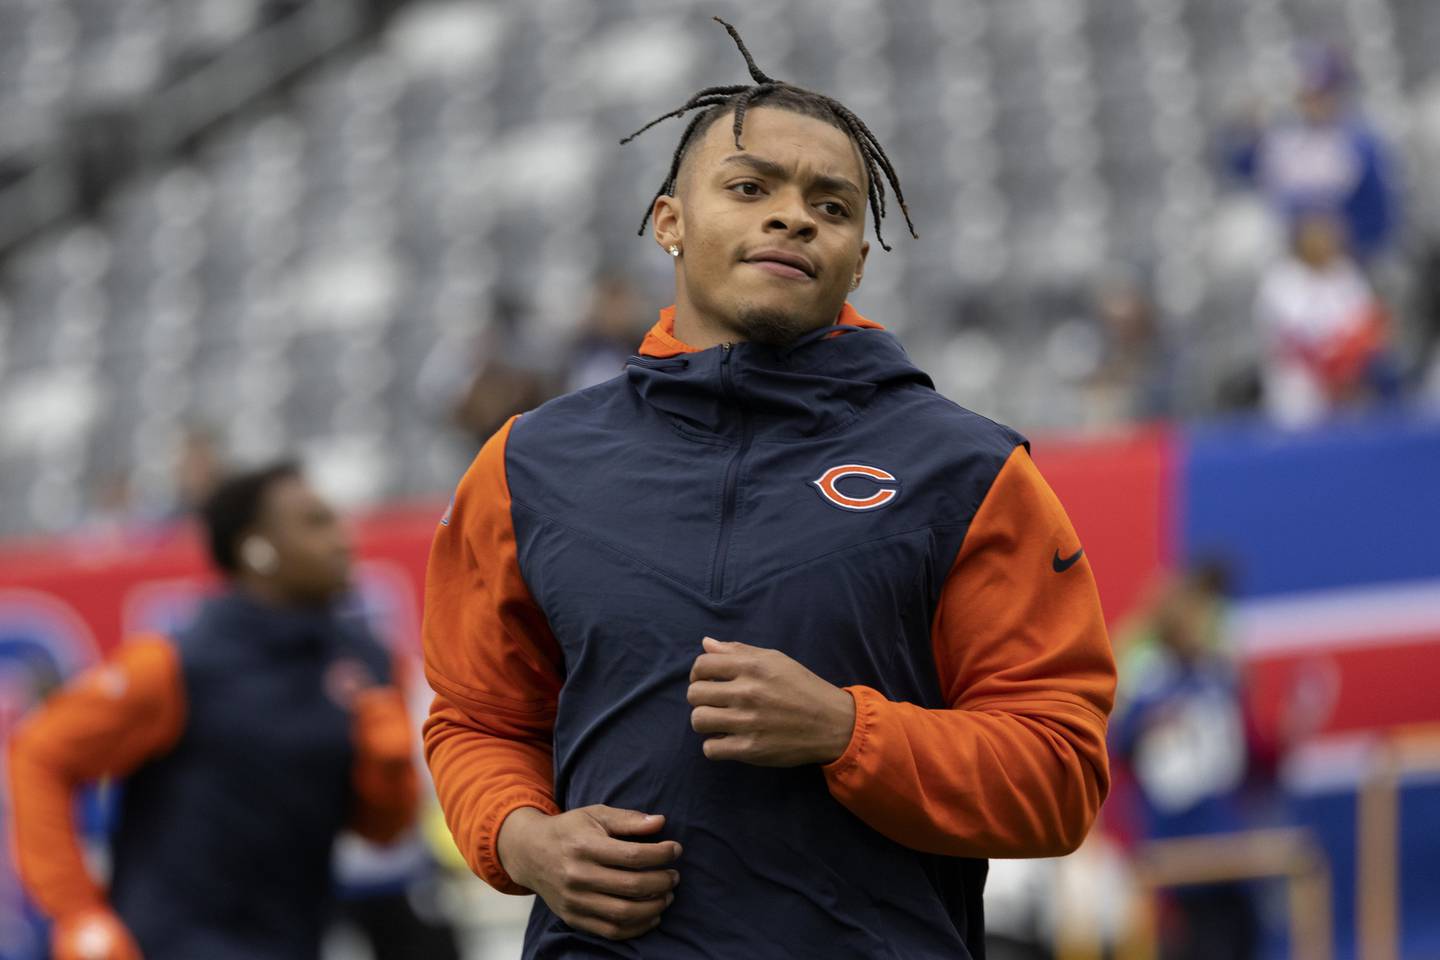 Bears quarterback Justin Fields warms up before a game against the Giants on Sunday at MetLife Stadium in East Rutherford, N.J. 